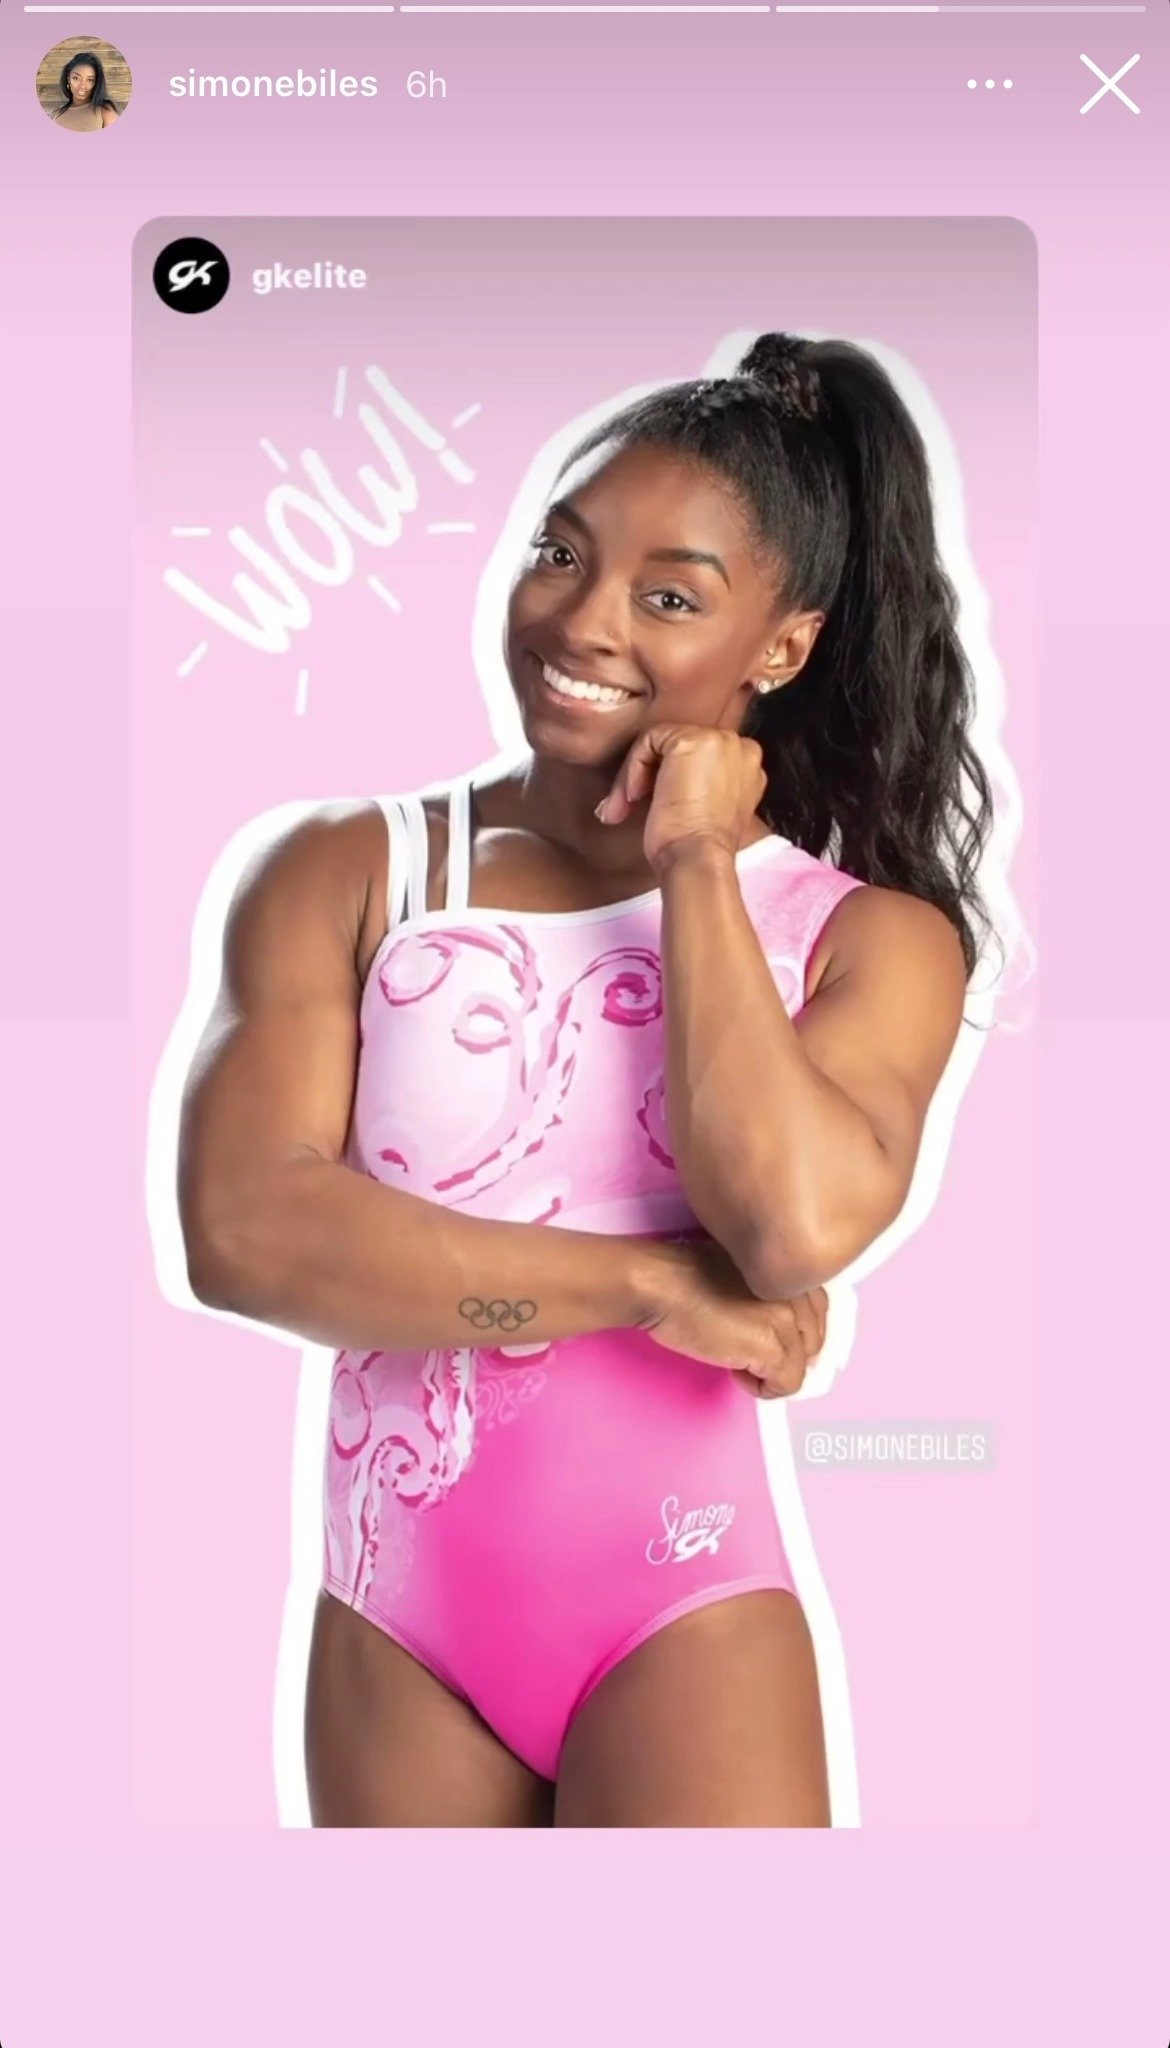 Simone Biles wearing a pink gymnast apparel from GK Elite, showing her toned body. | Photo: instagram.com/simonebiles